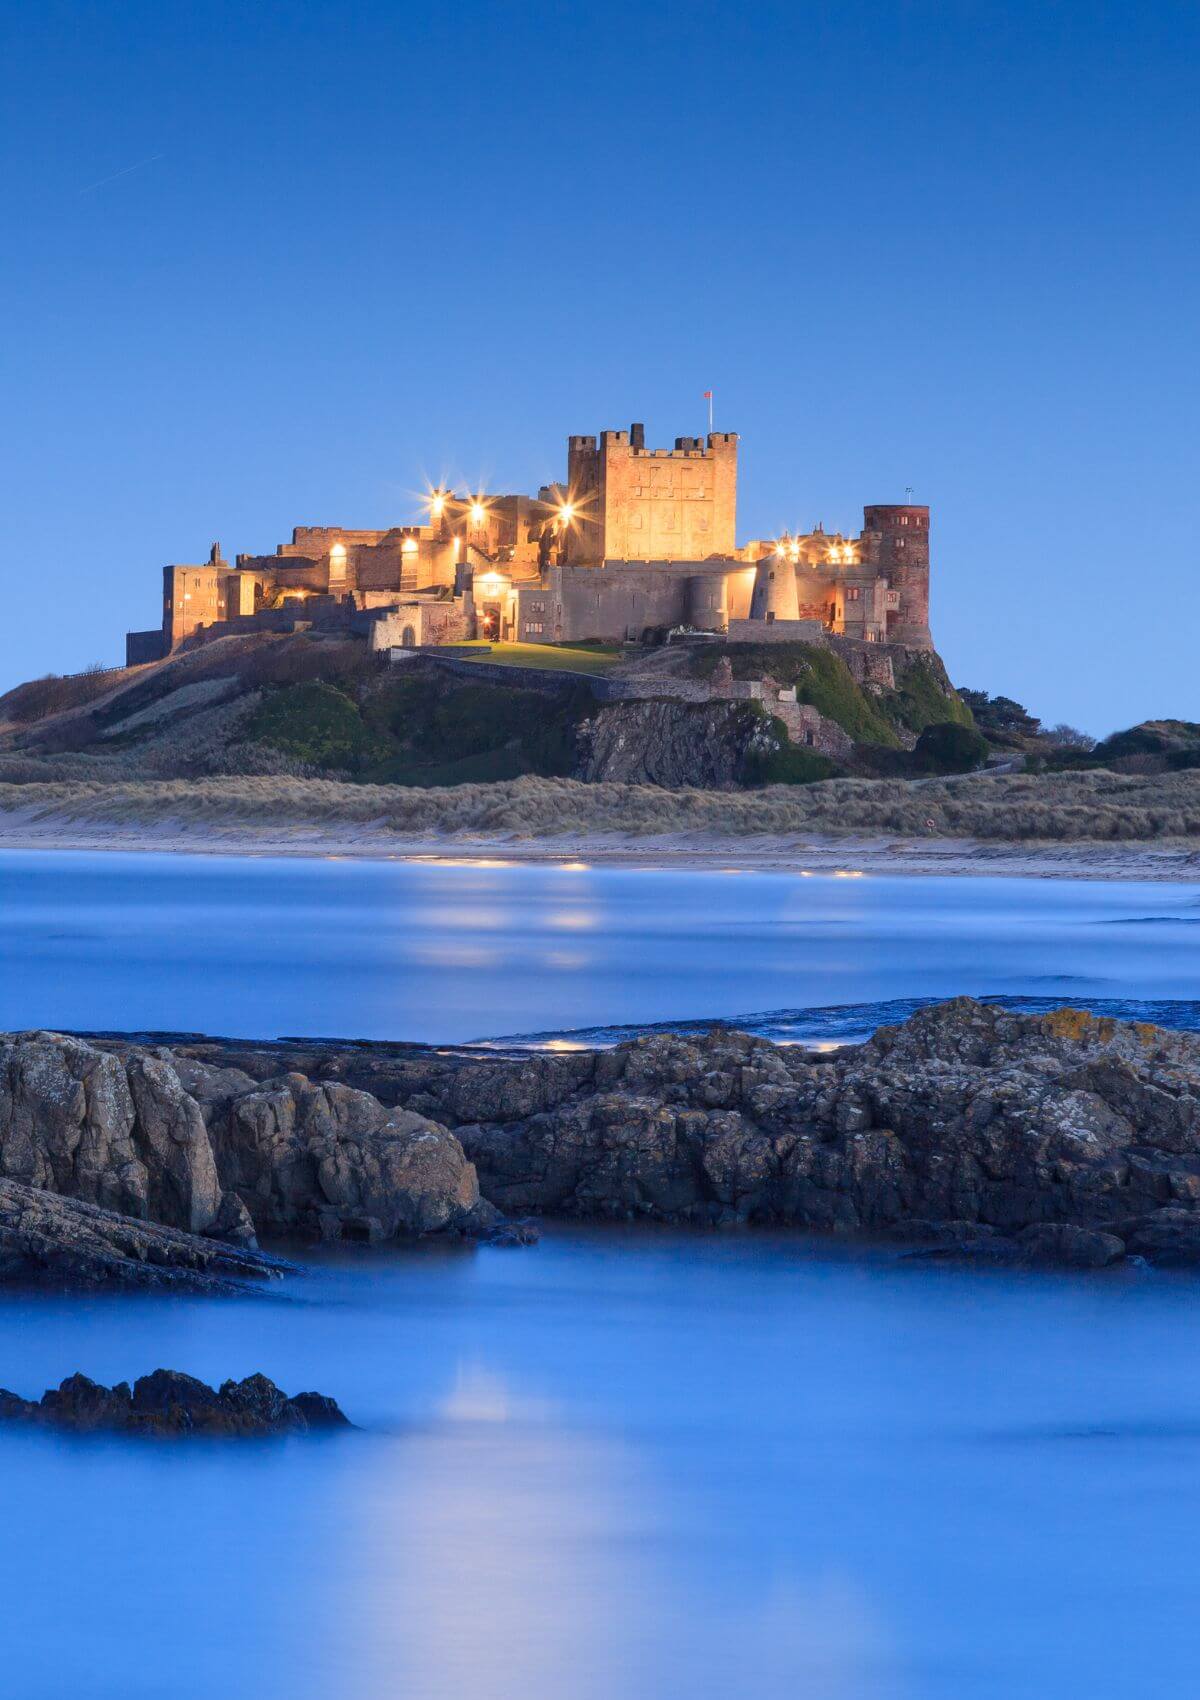 The castle in the interesting town of Bamburgh